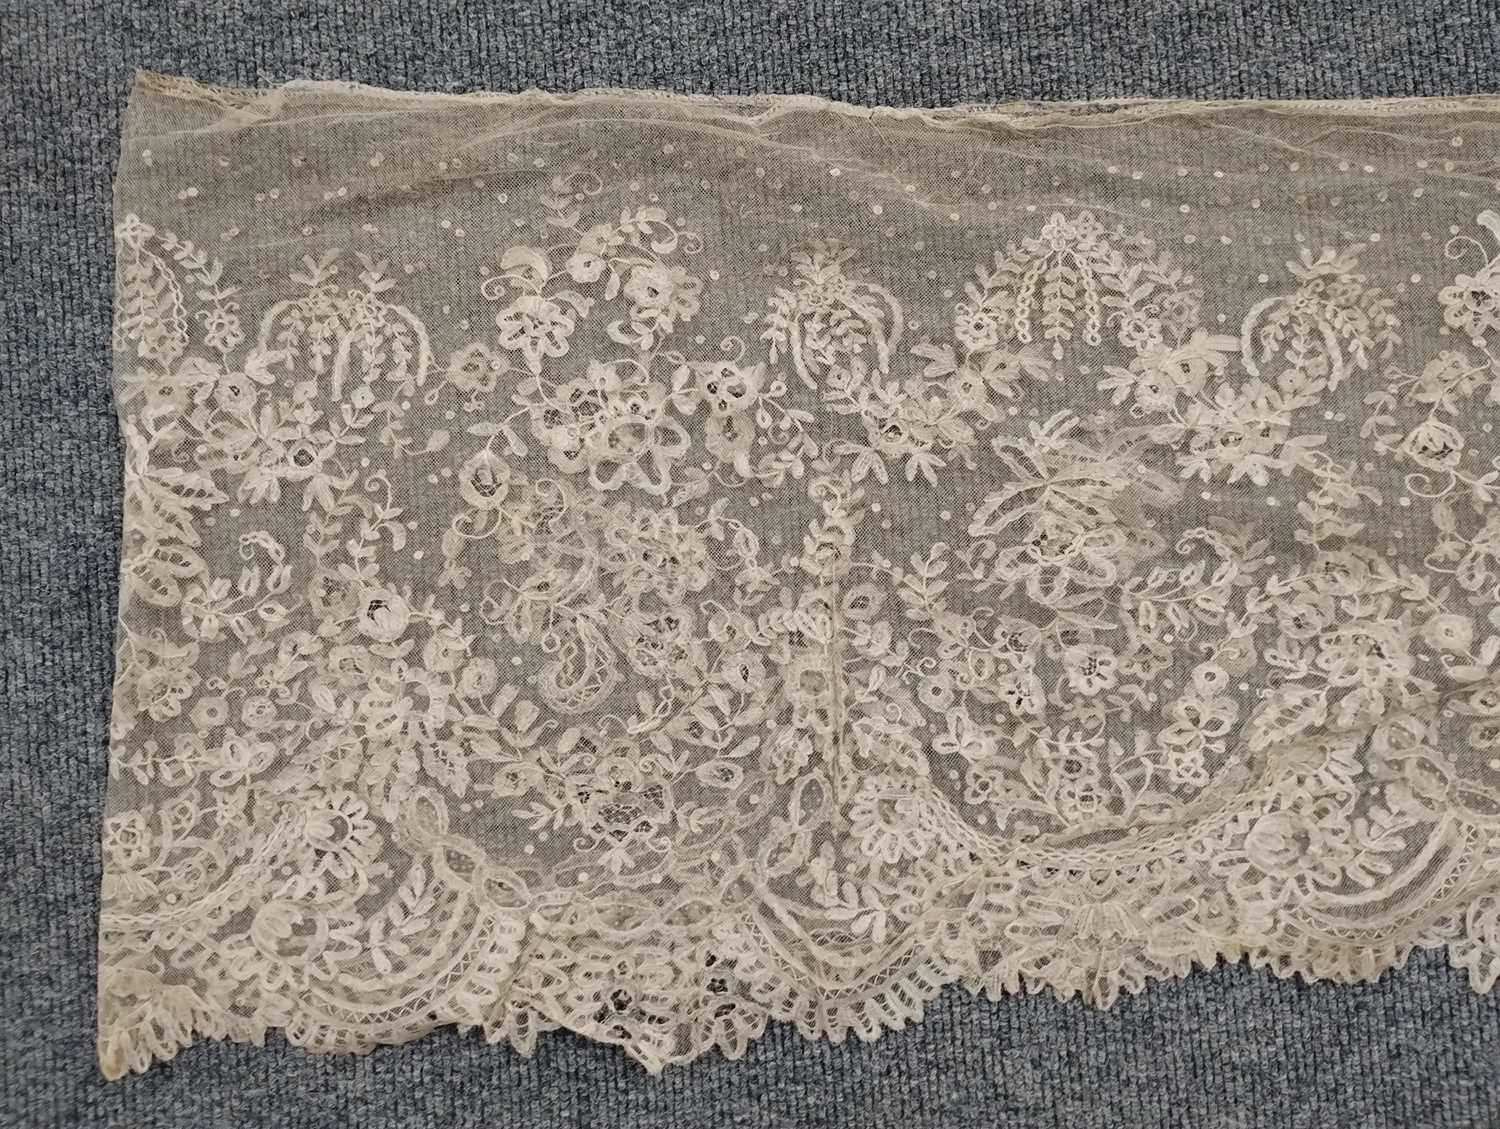 Early 20th Century Lace comprising a flounce with appliquéd flower heads and motifs within a - Image 4 of 32